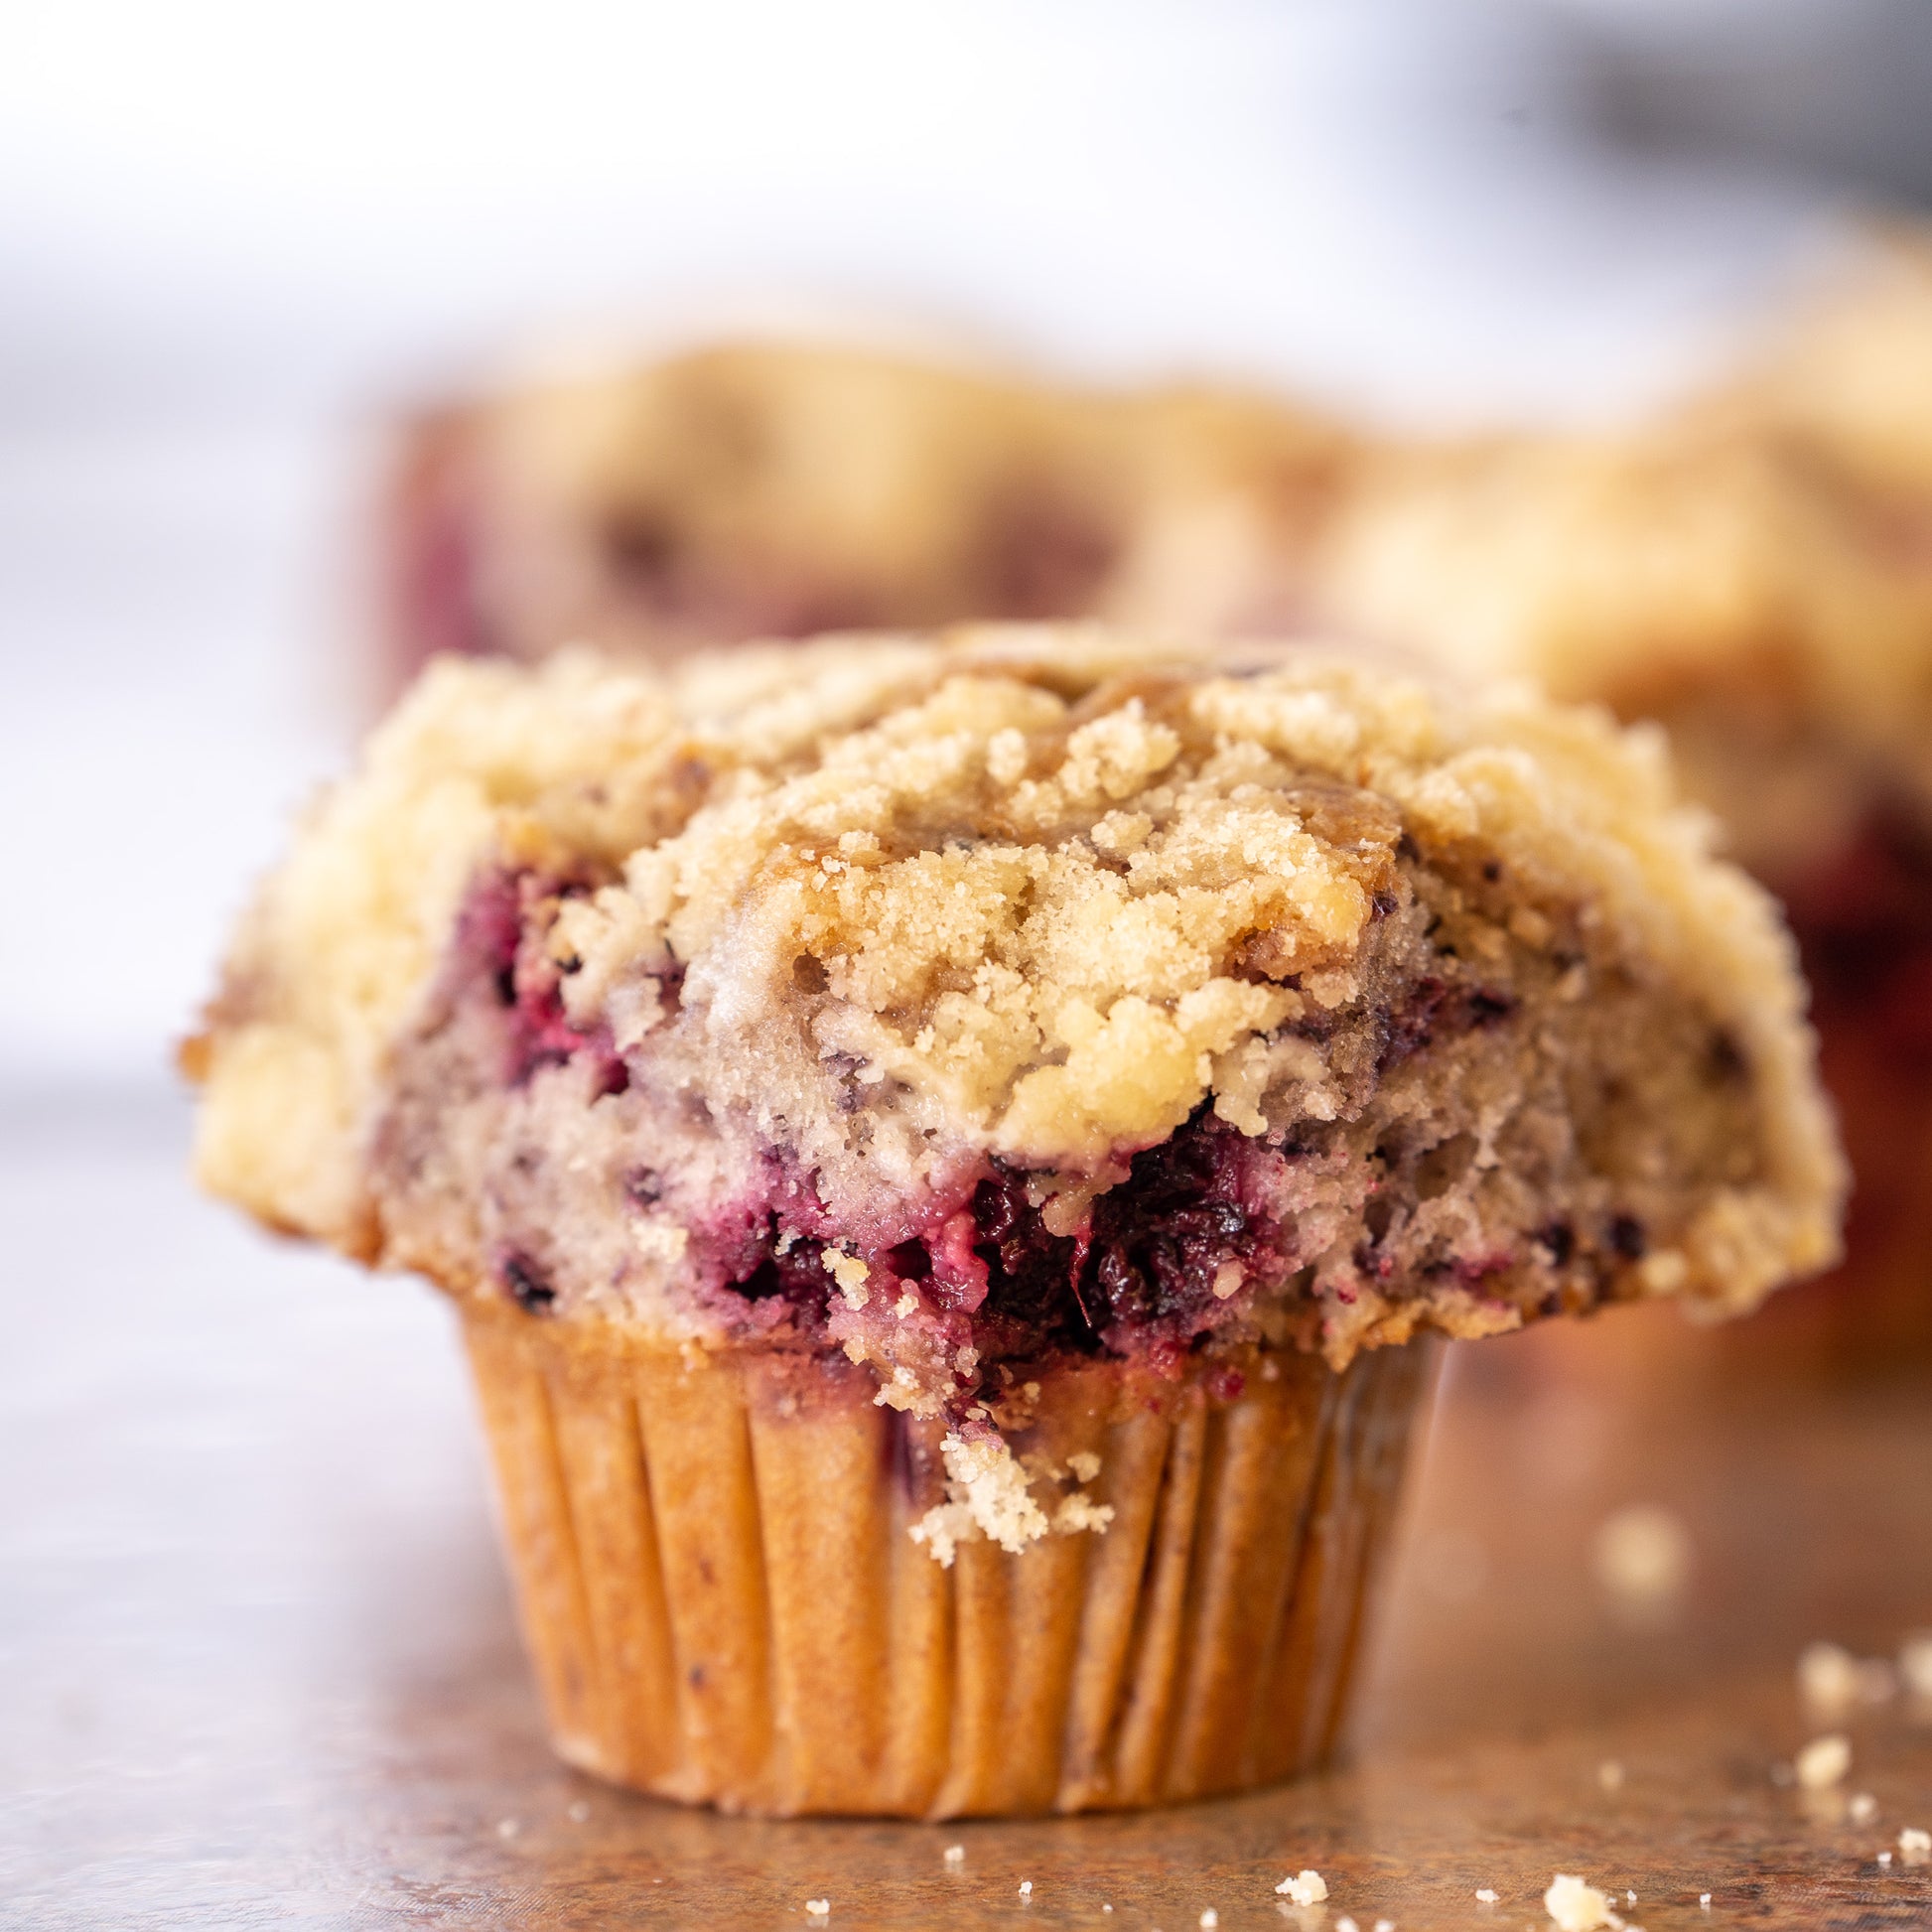 Marionberry muffin 4 pack